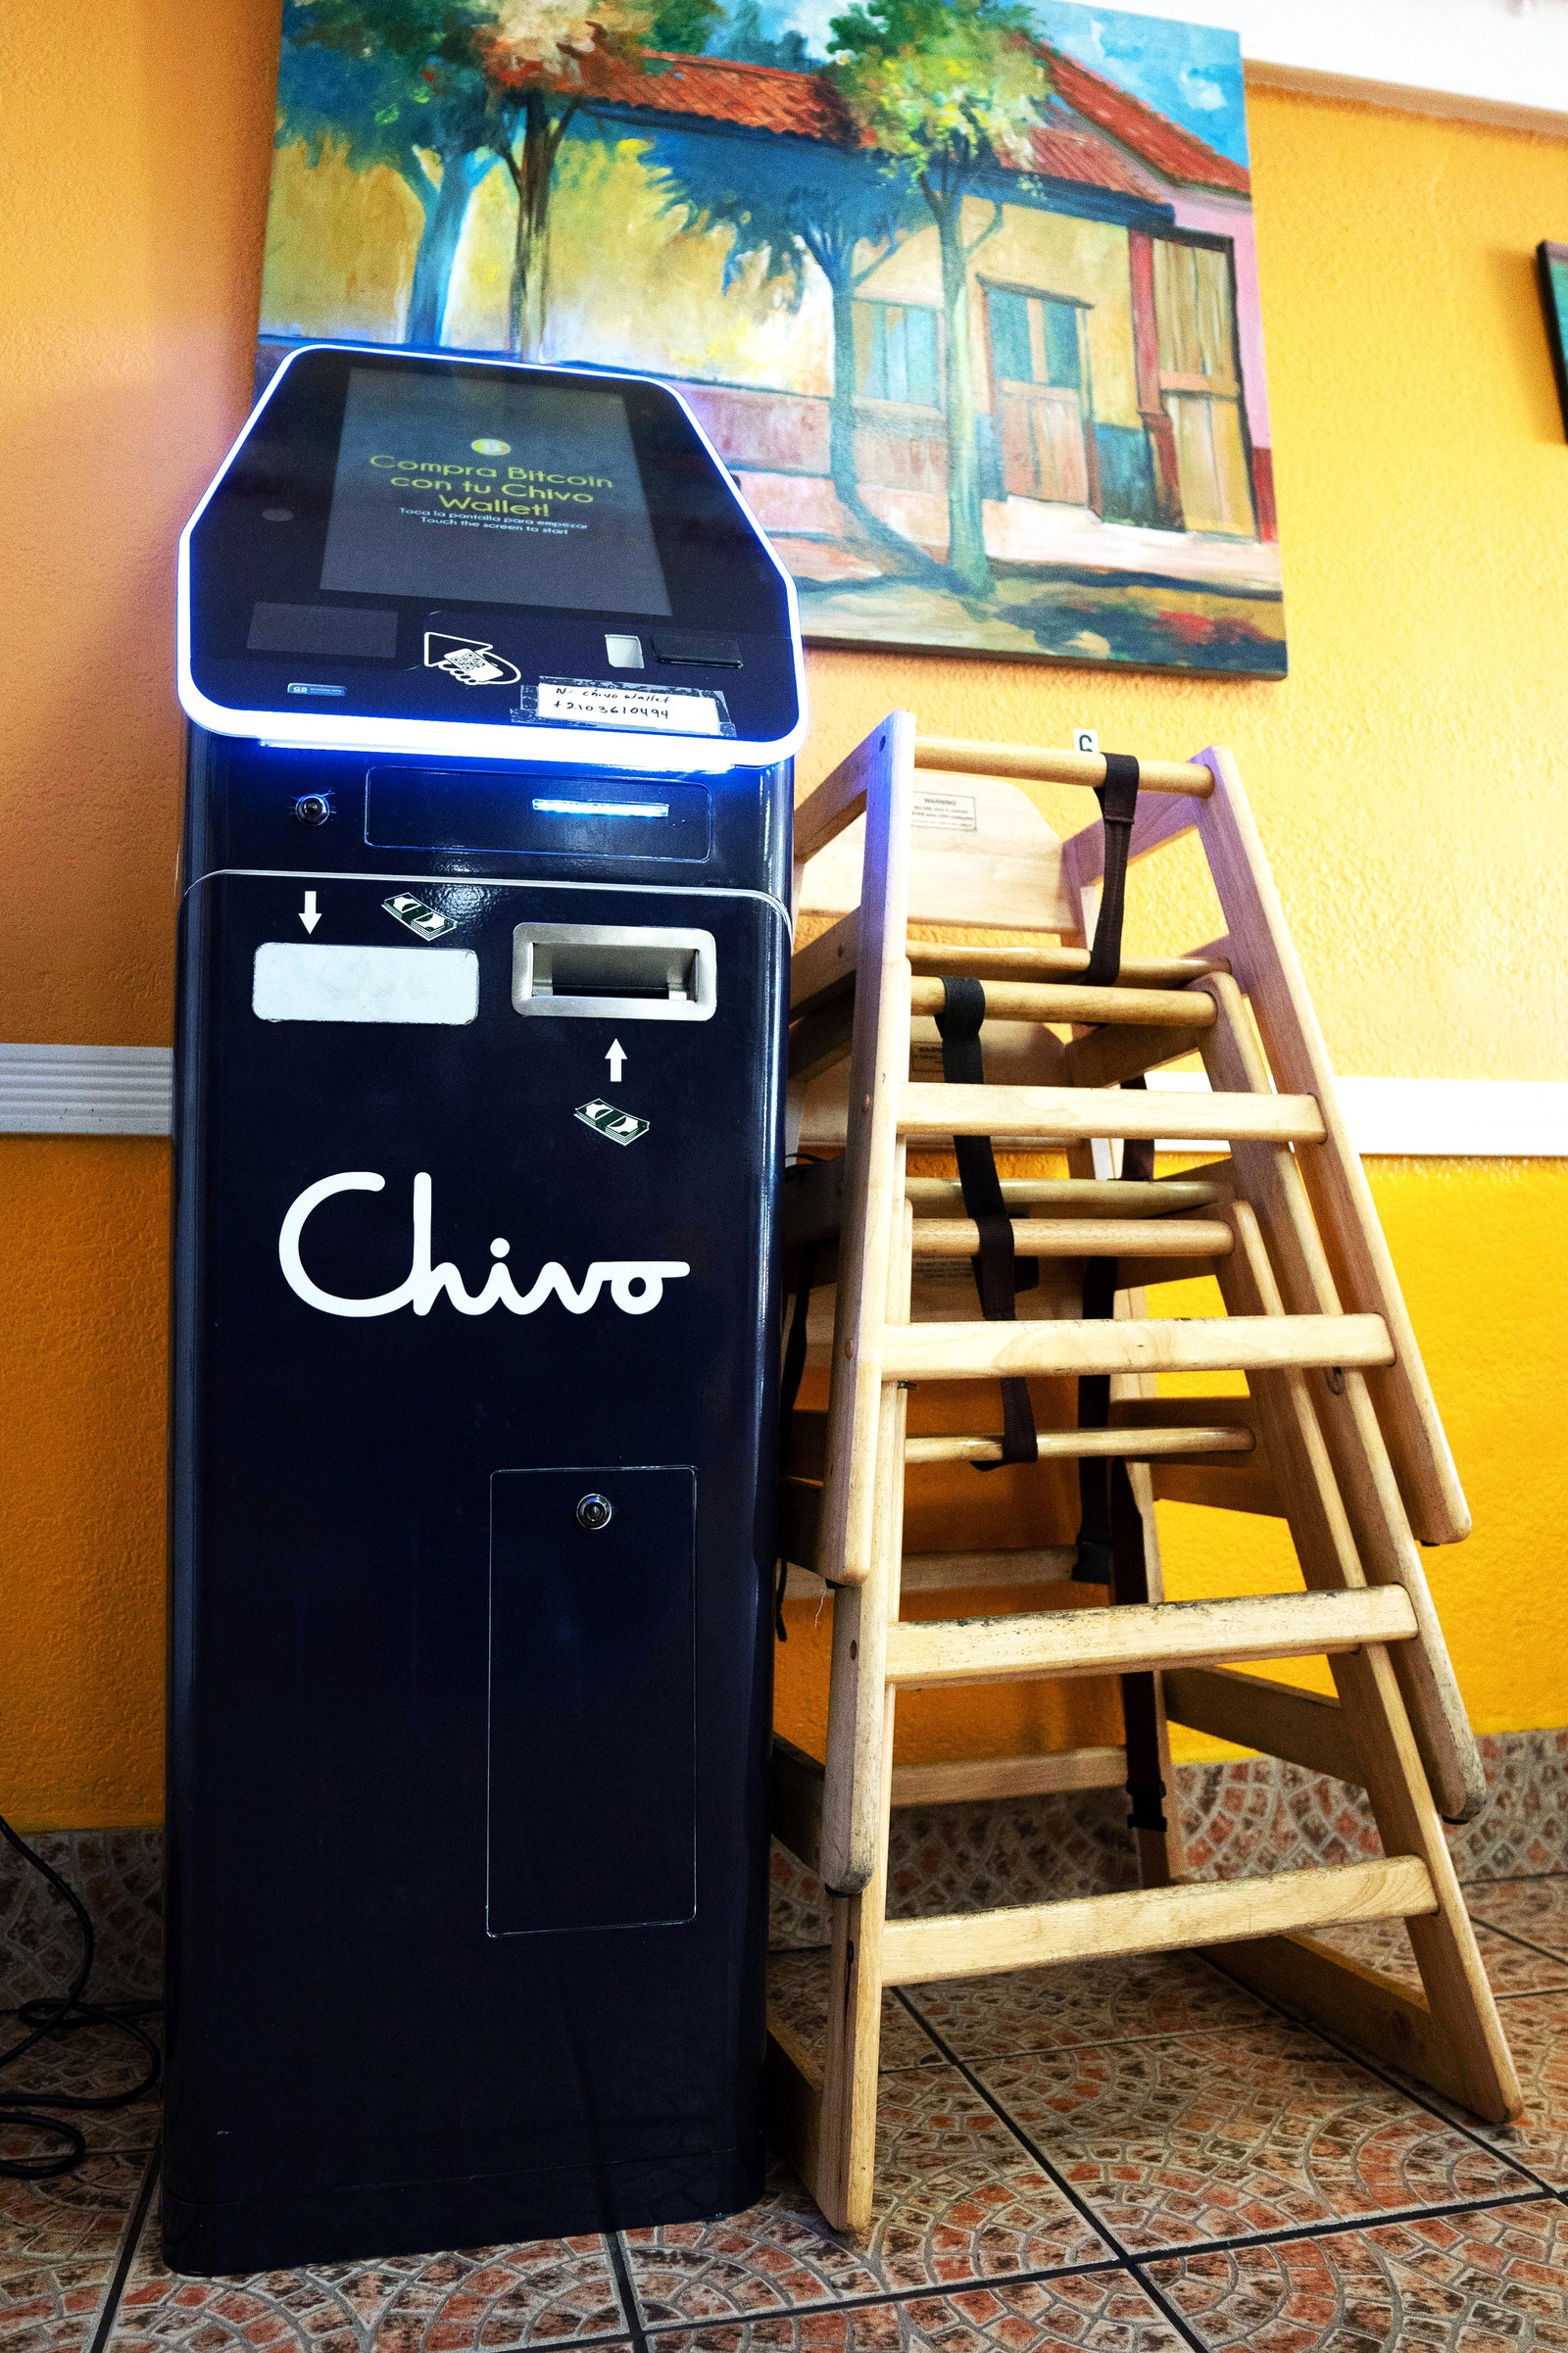 Chivo Bitcoin ATM next to a stack of wooden booster seats inside a Salvadoran restaurant in Oakland CA